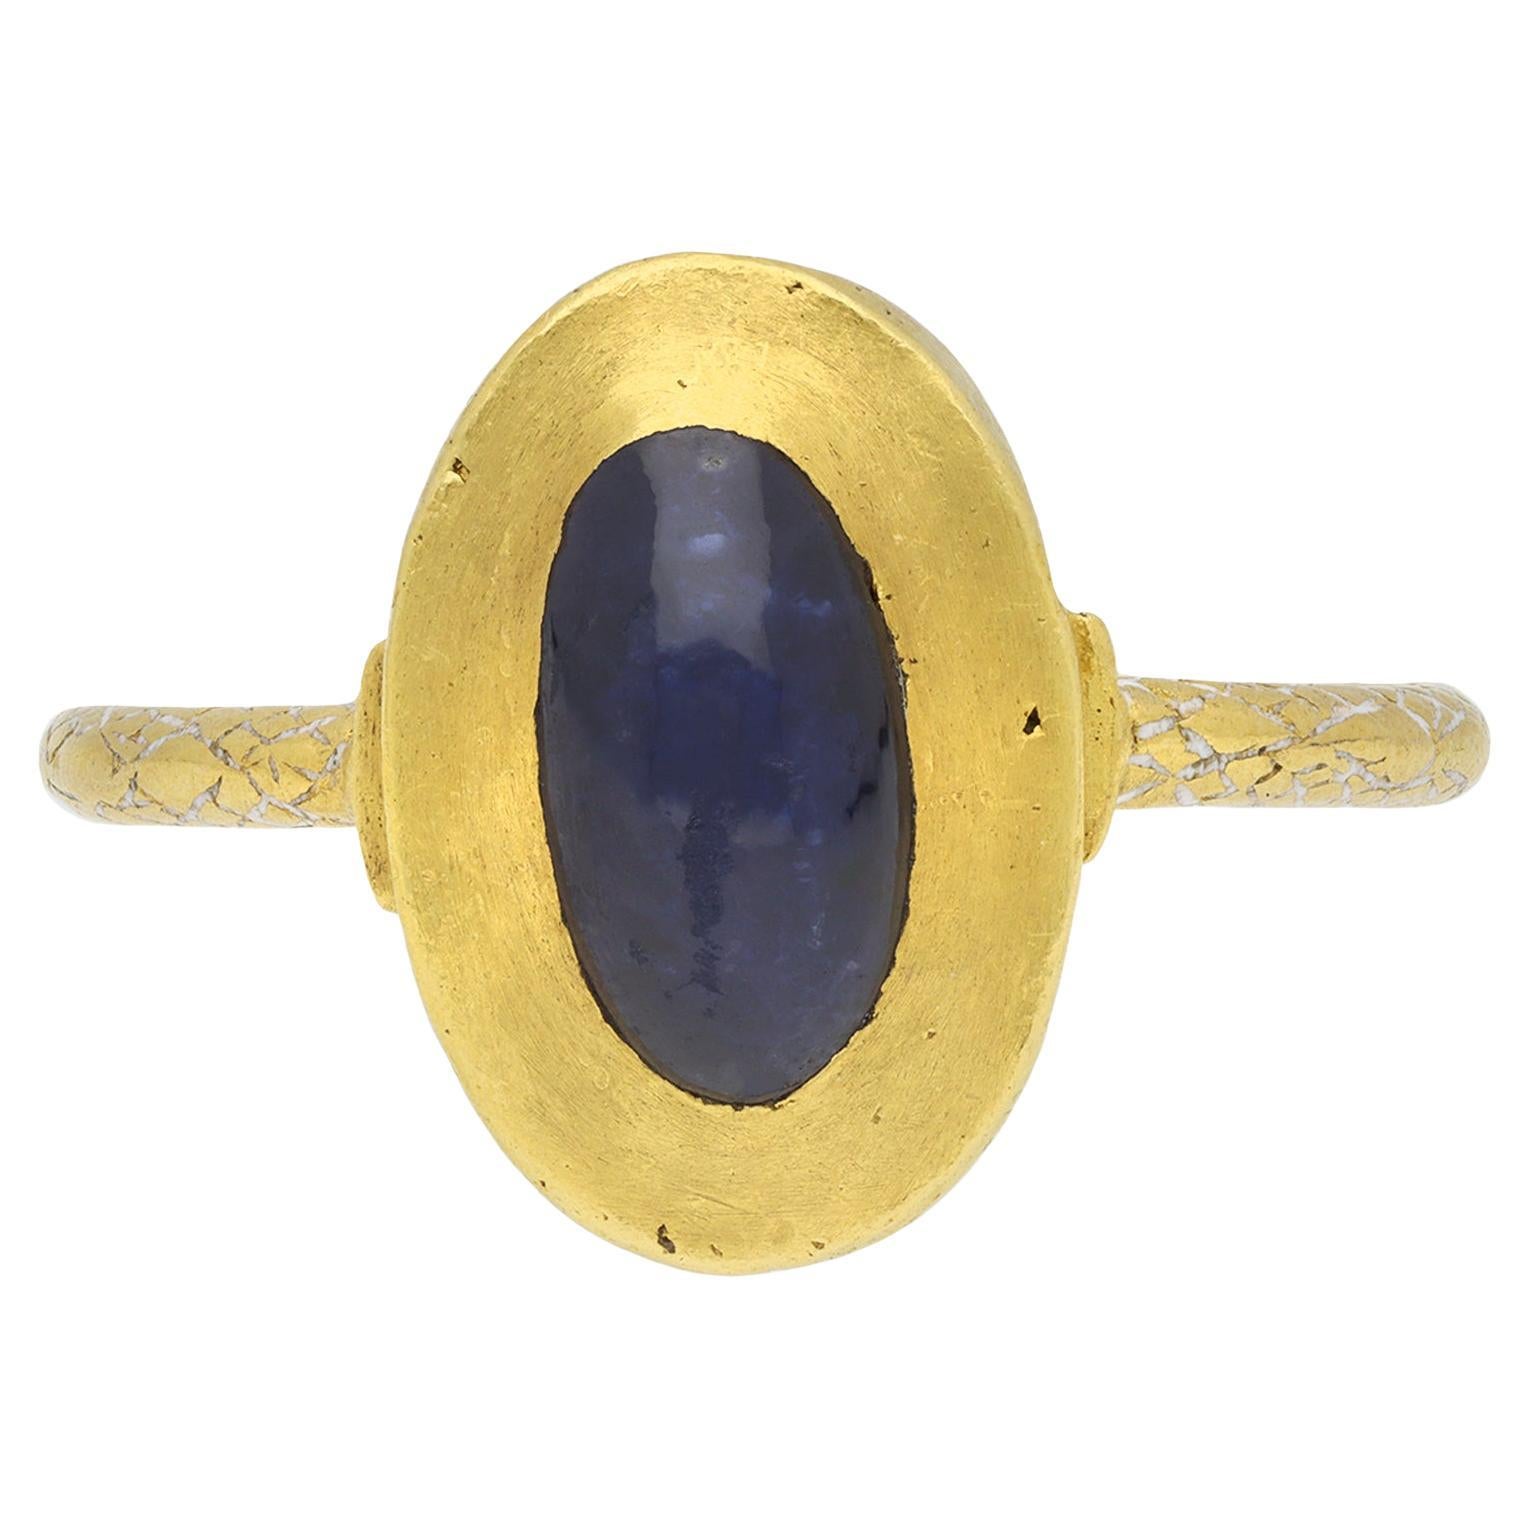 Medieval Sapphire Fede Ring, circa 14th Century AD